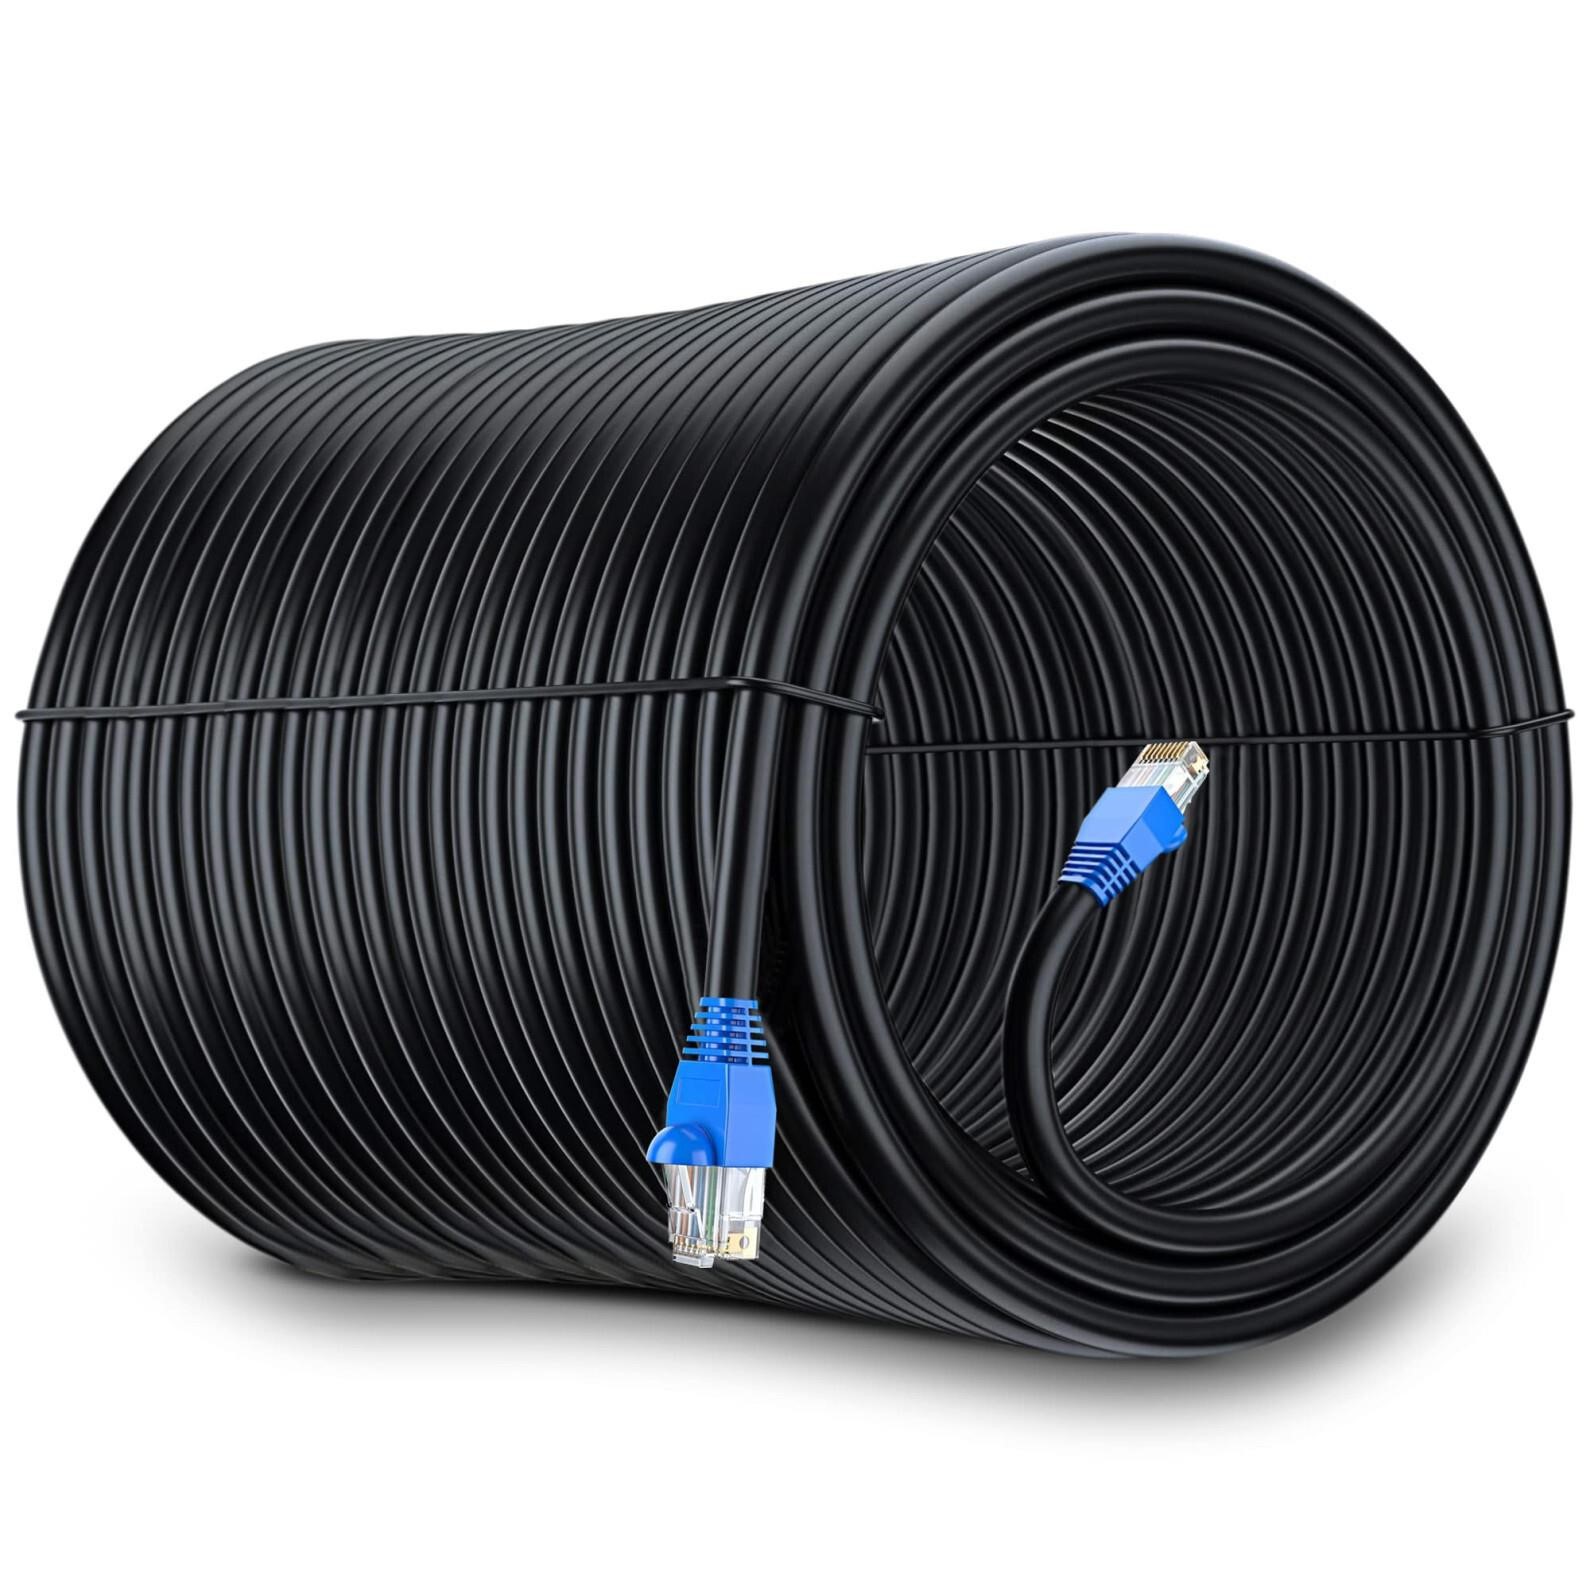 AURUM CABLES Cat6 Ethernet Cable for Gaming 500 ft